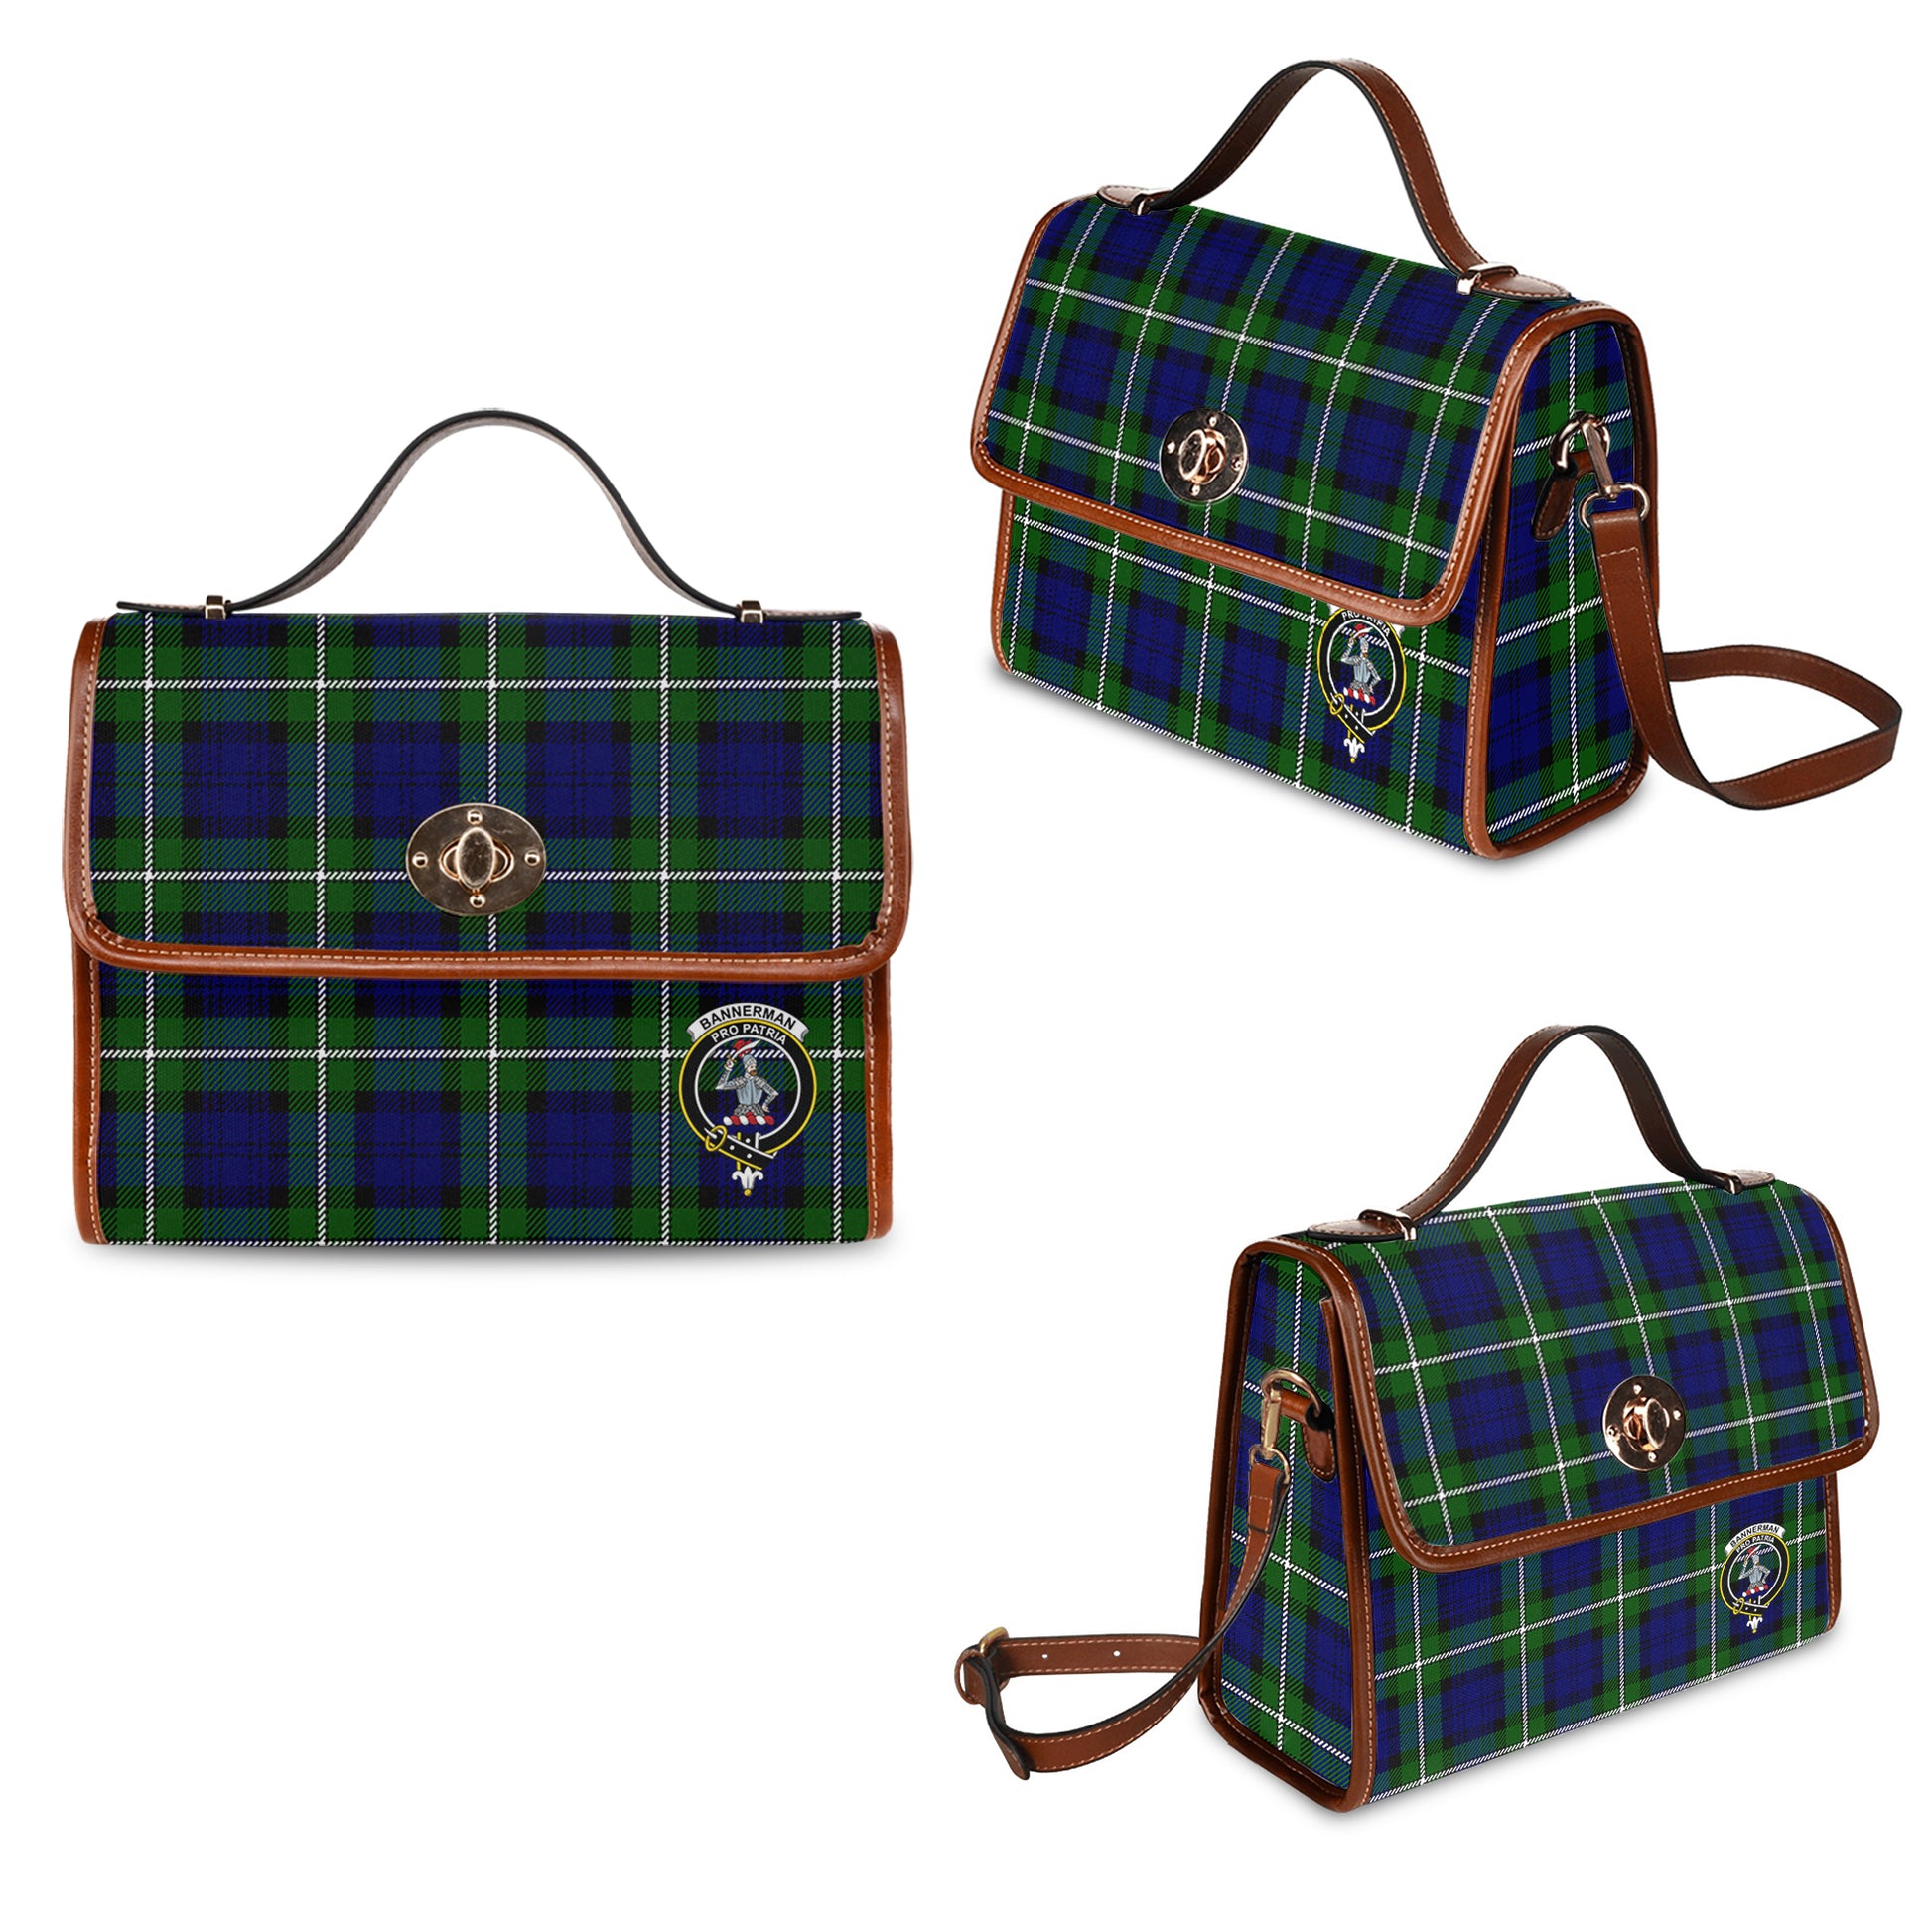 Bannerman Tartan Leather Strap Waterproof Canvas Bag with Family Crest One Size 34cm * 42cm (13.4" x 16.5") - Tartanvibesclothing